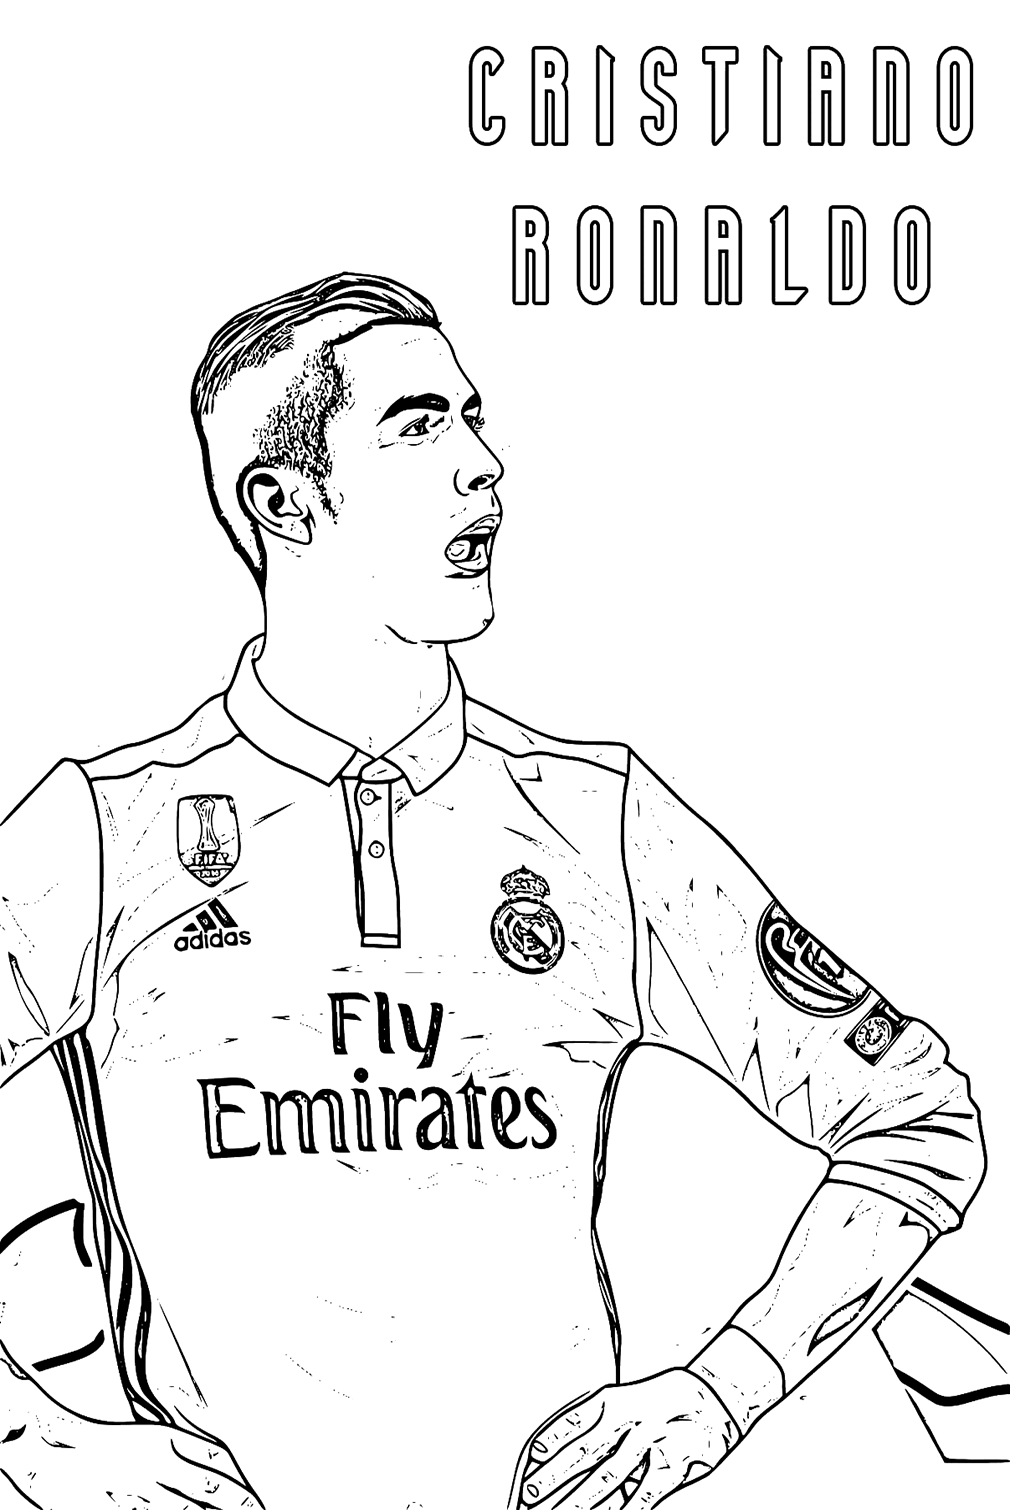 Cristiano Ronaldo Coloring Pages - Coloring Pages For Kids And Adults